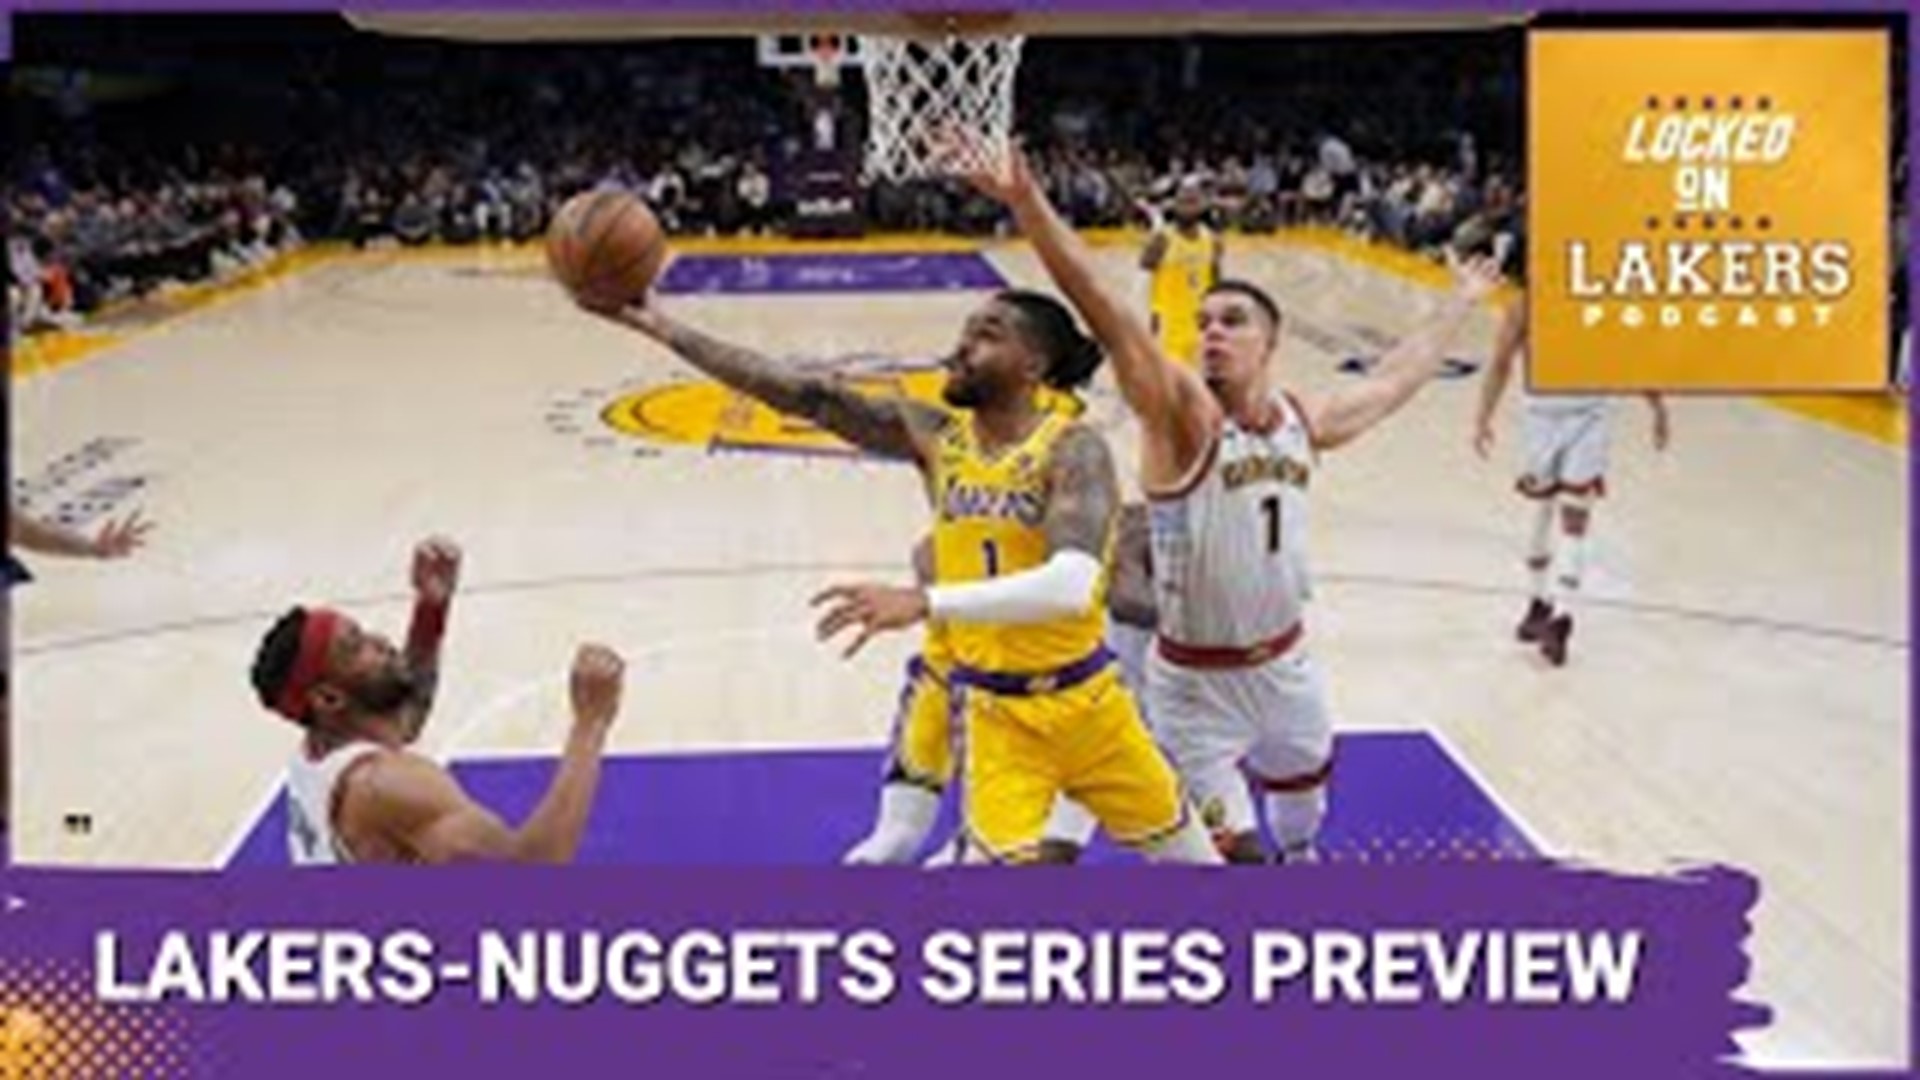 The overwhelming consensus has the defending champion Denver Nuggets winning their first-round series against the Lakers, and relatively easily.